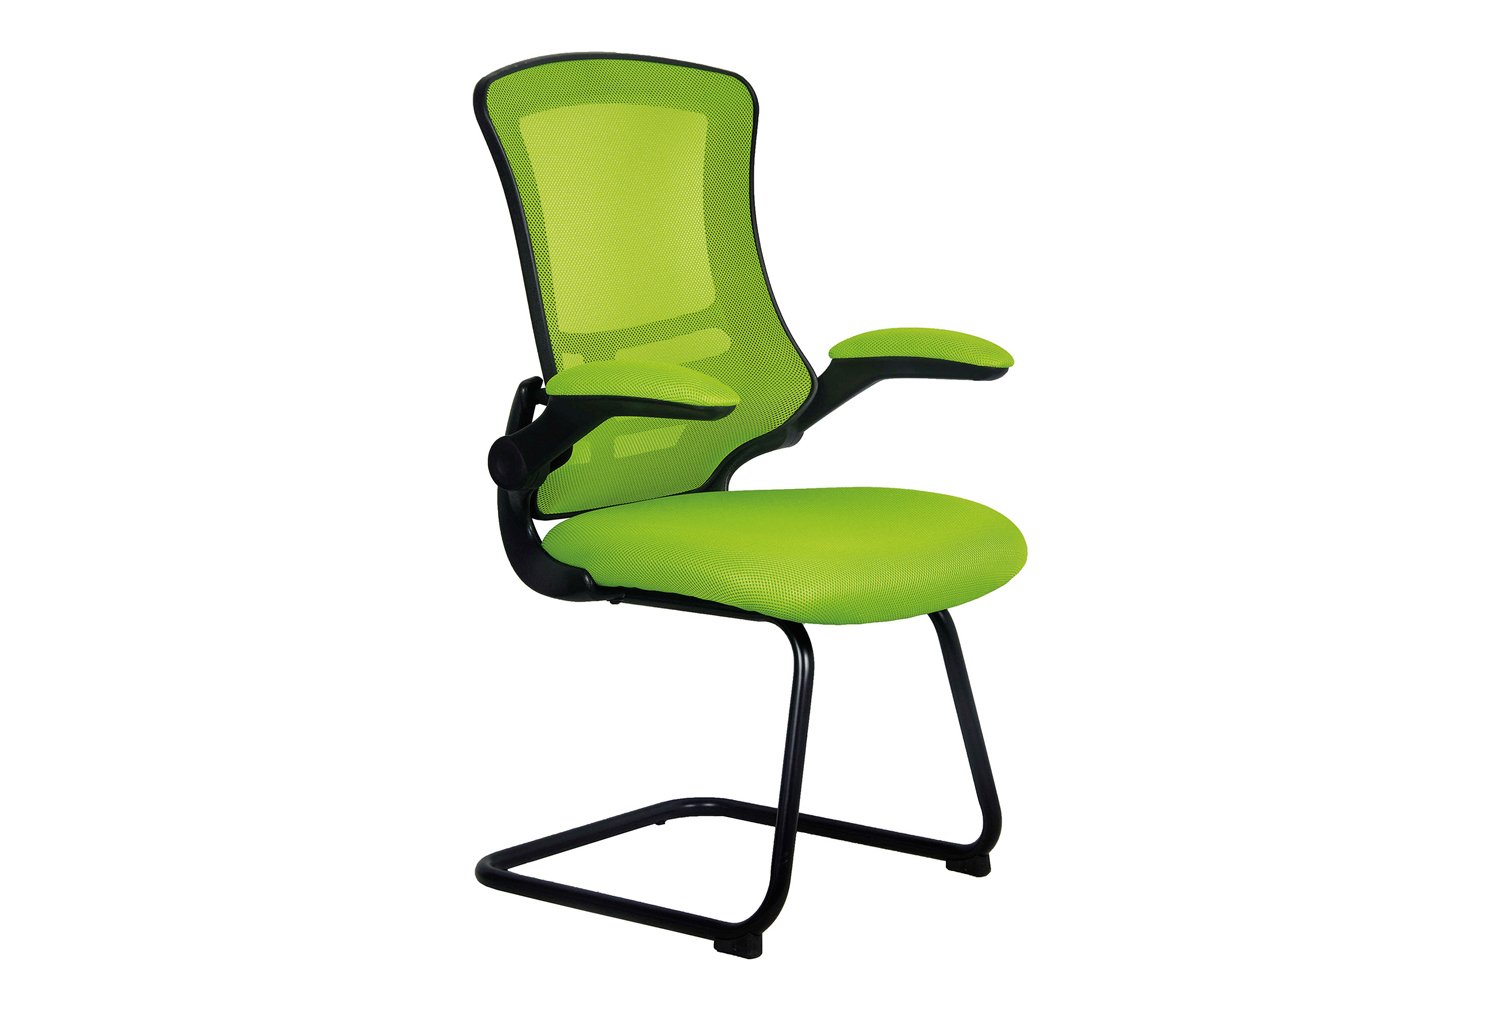 Moon Mesh Back Visitor Office Chair With Black Frame (Lime Green), Fully Installed